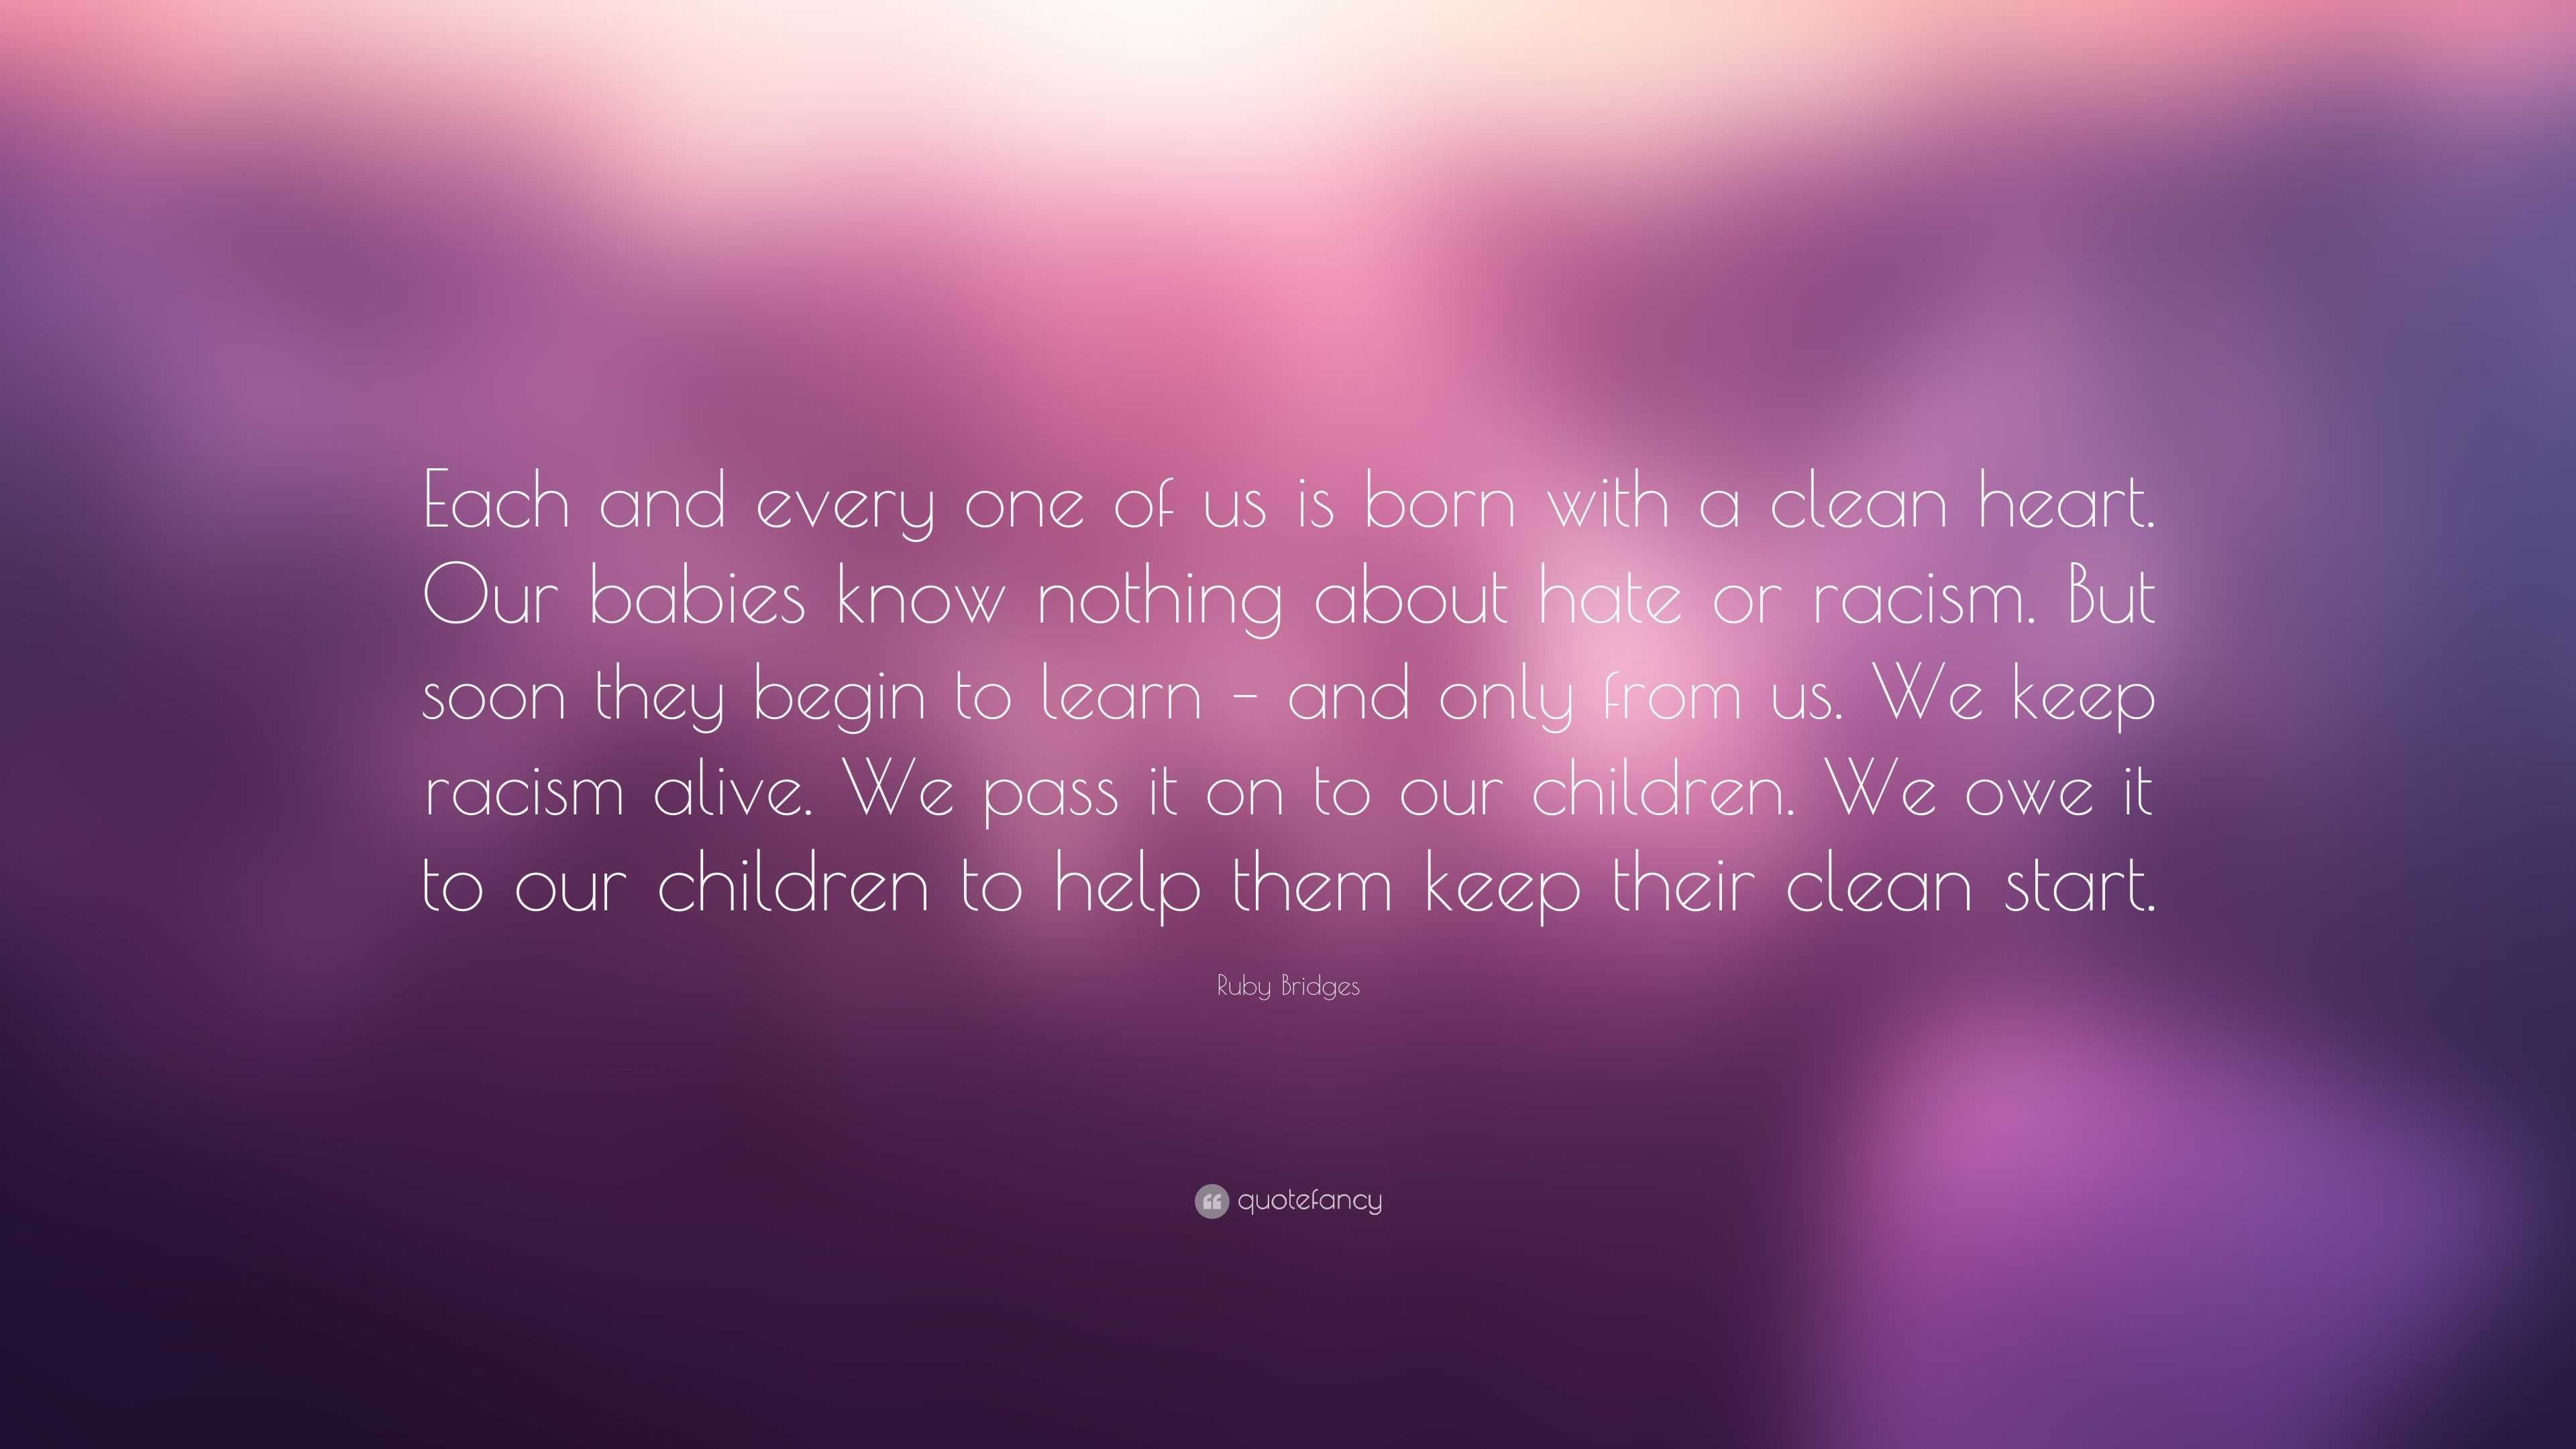 2436700 Ruby Bridges Quote Each and every one of us is born with a clean